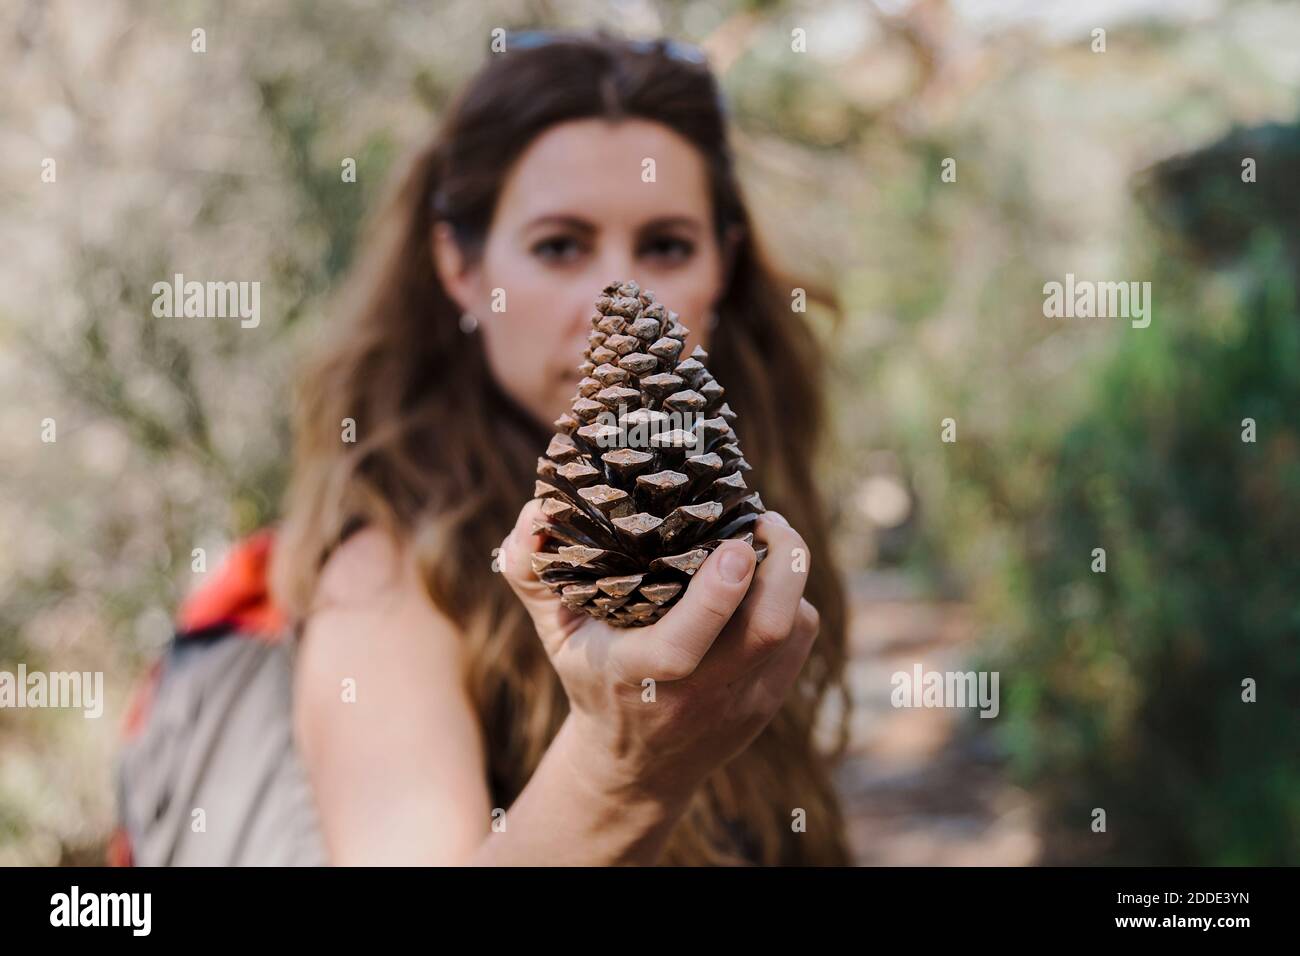 Trekker holding pine cone while standing in forest at La Pedriza, Madrid, Spain Stock Photo